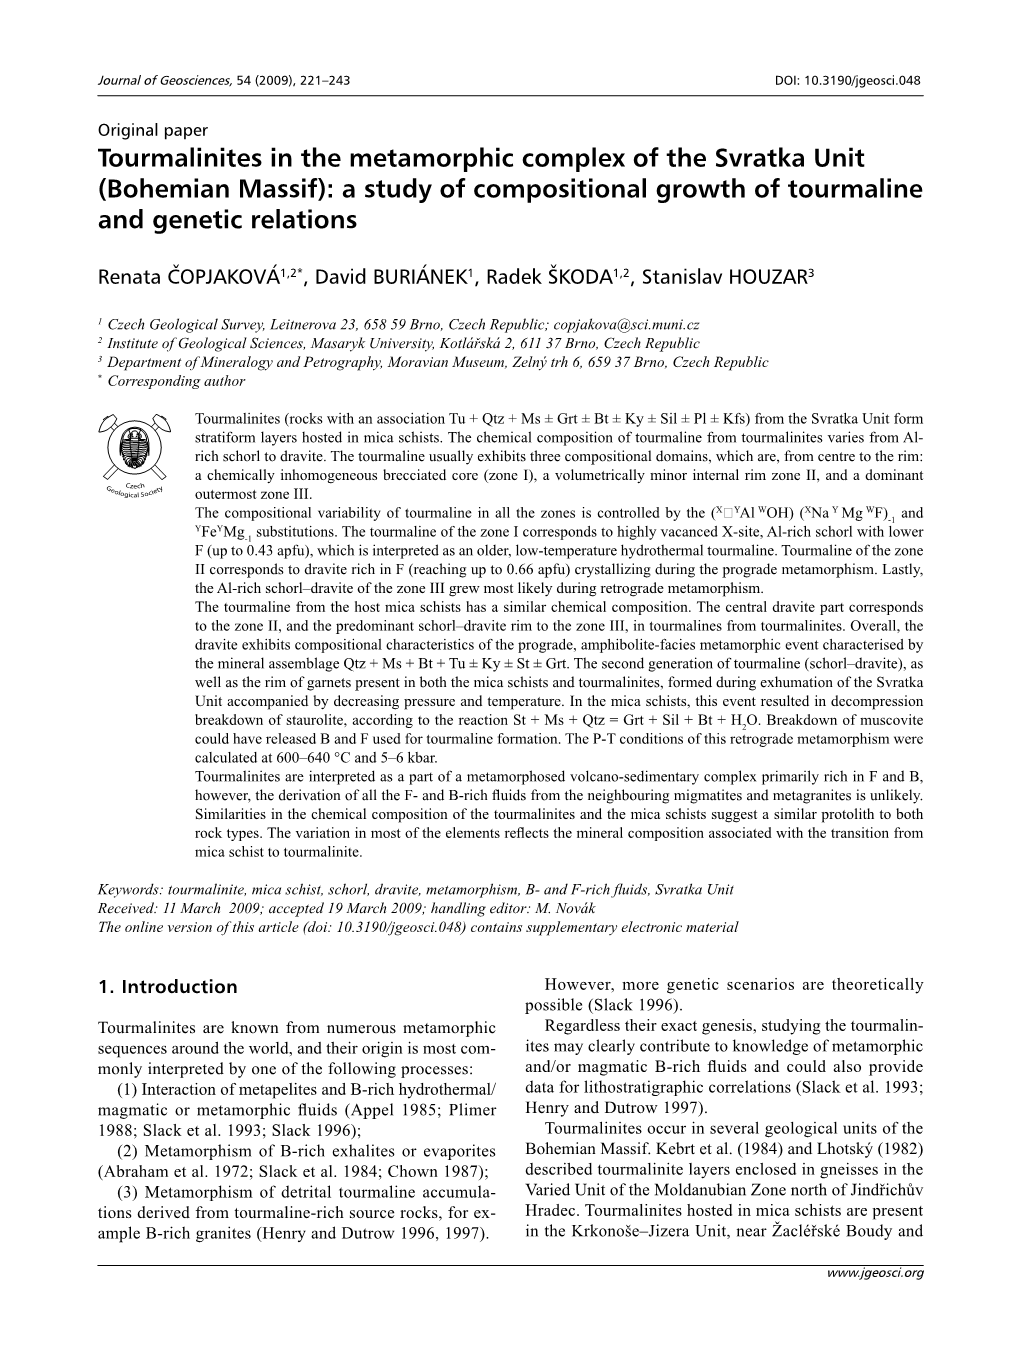 Tourmalinites in the Metamorphic Complex of the Svratka Unit (Bohemian Massif): a Study of Compositional Growth of Tourmaline and Genetic Relations